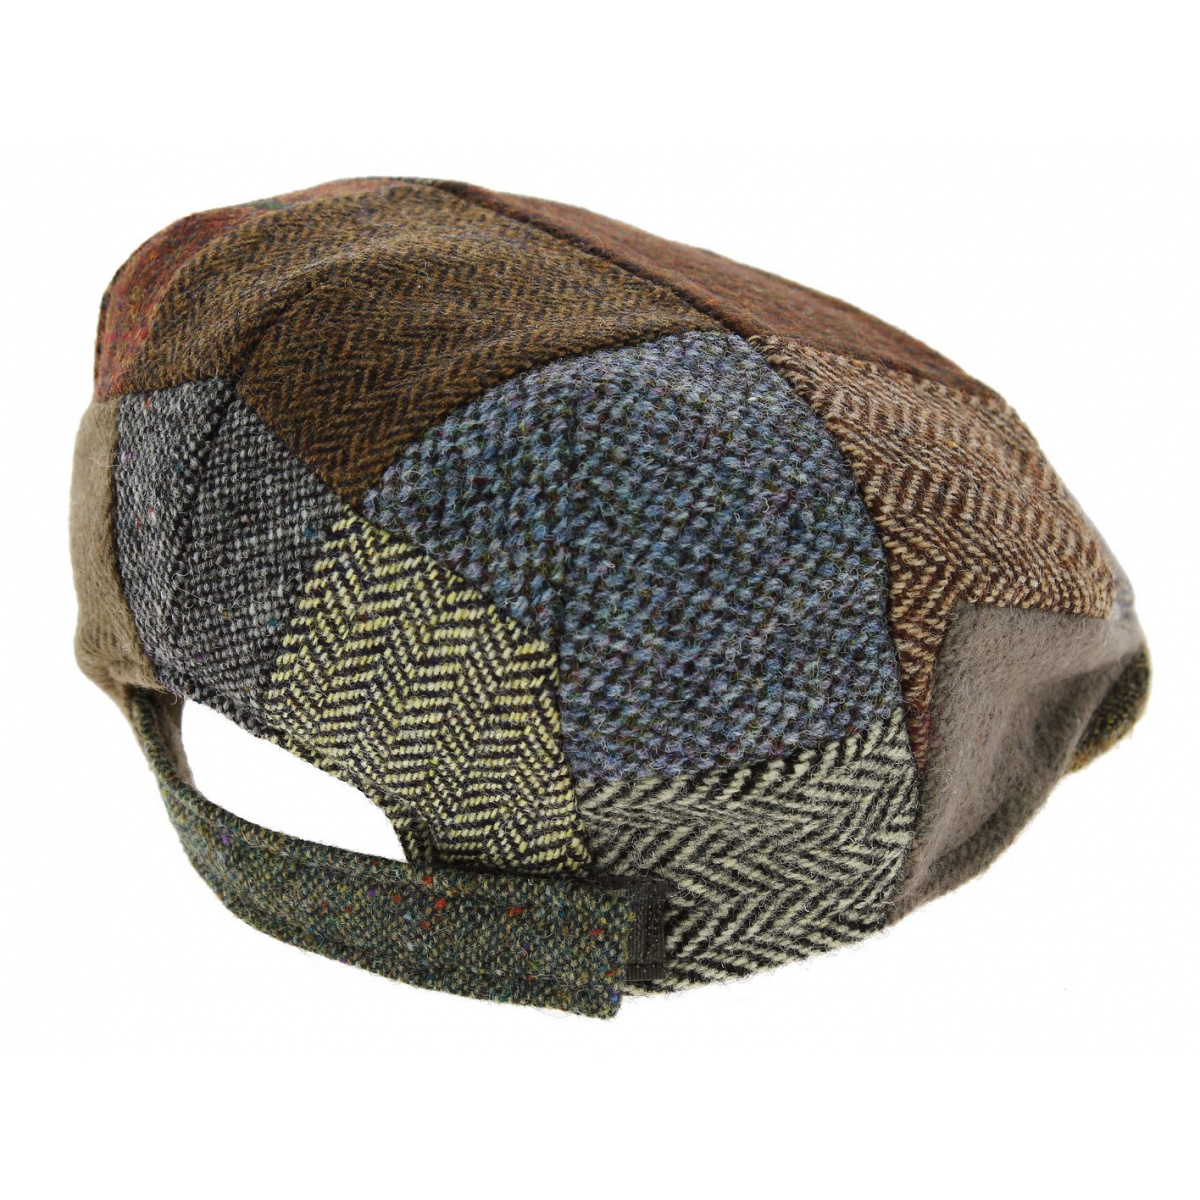 Casquette Plate Monaghan Patchwork Laine Vierge - Hanna Hats